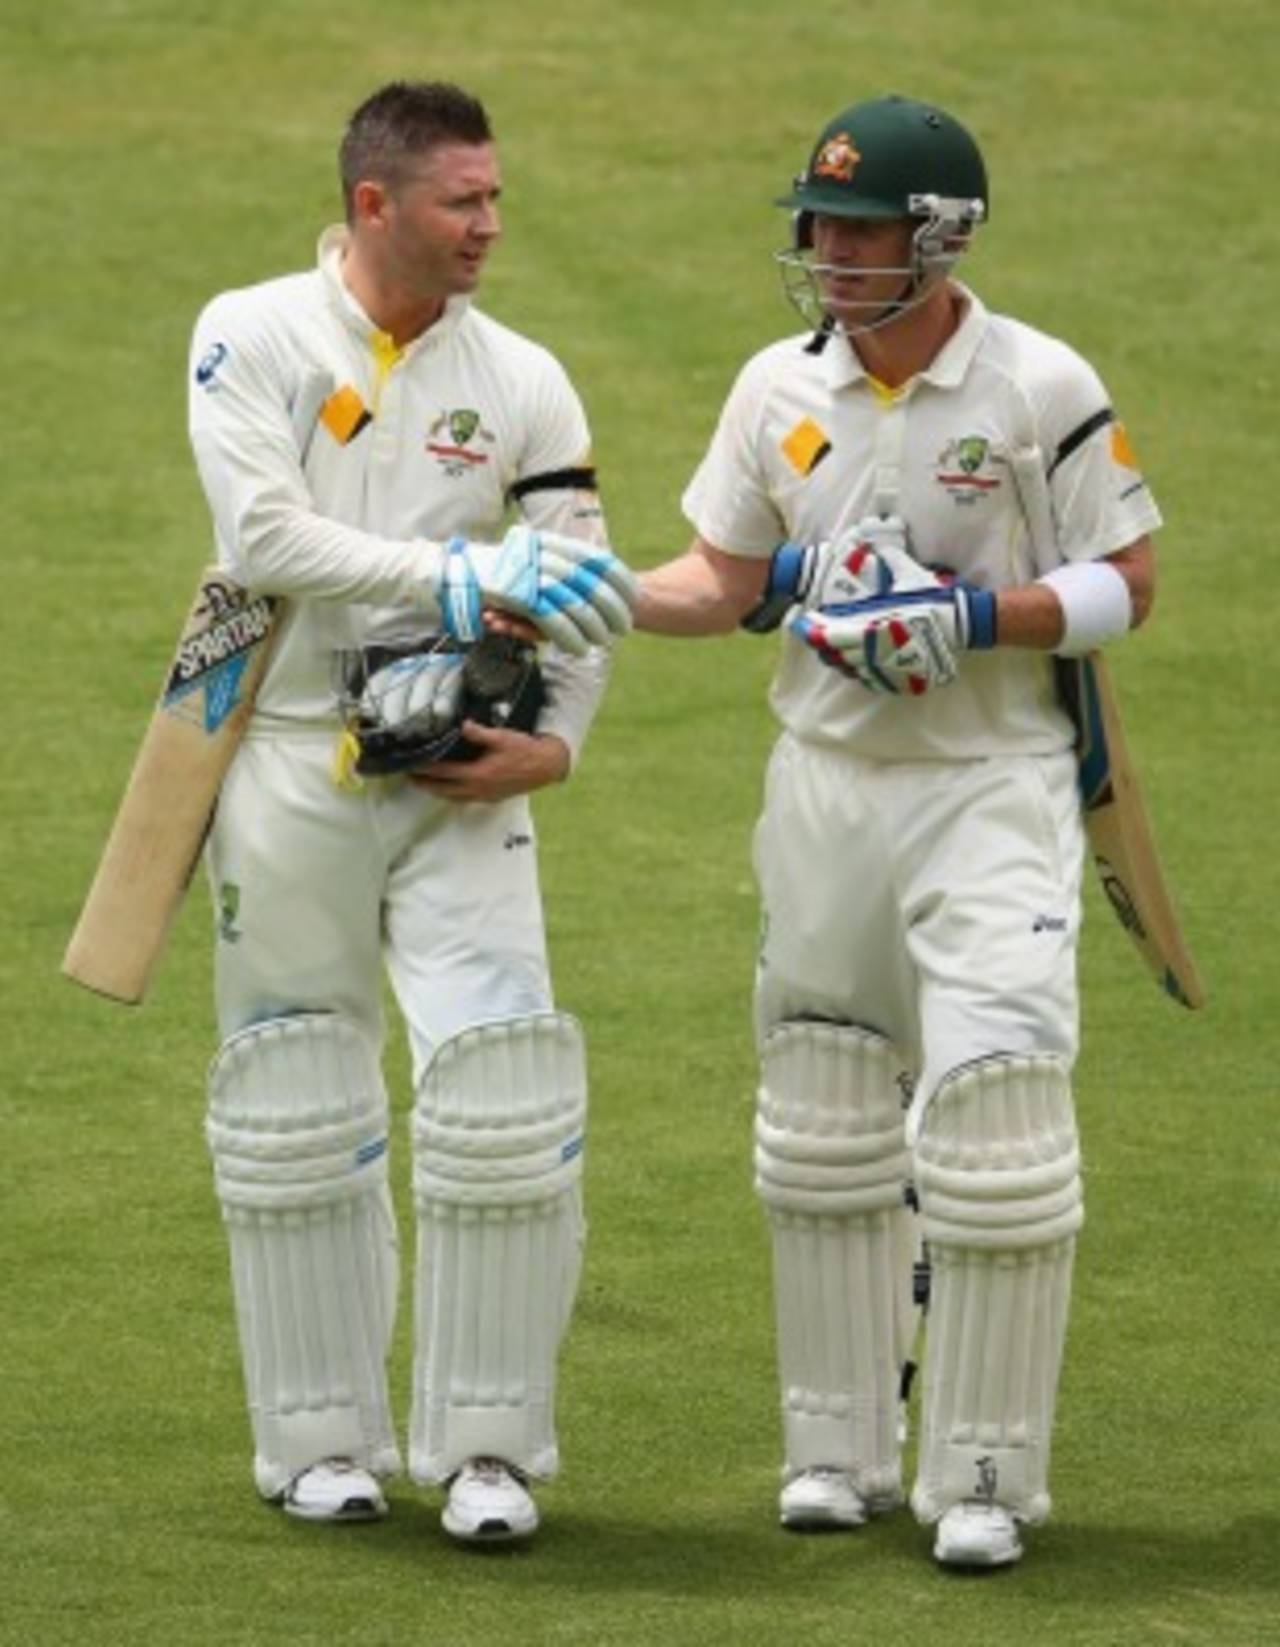 Michael Clarke and Brad Haddin combined for an Adelaide Oval record 200-run sixth-wicket stand, Australia v England, 2nd Test, Adelaide, 2nd day, December 6, 2013